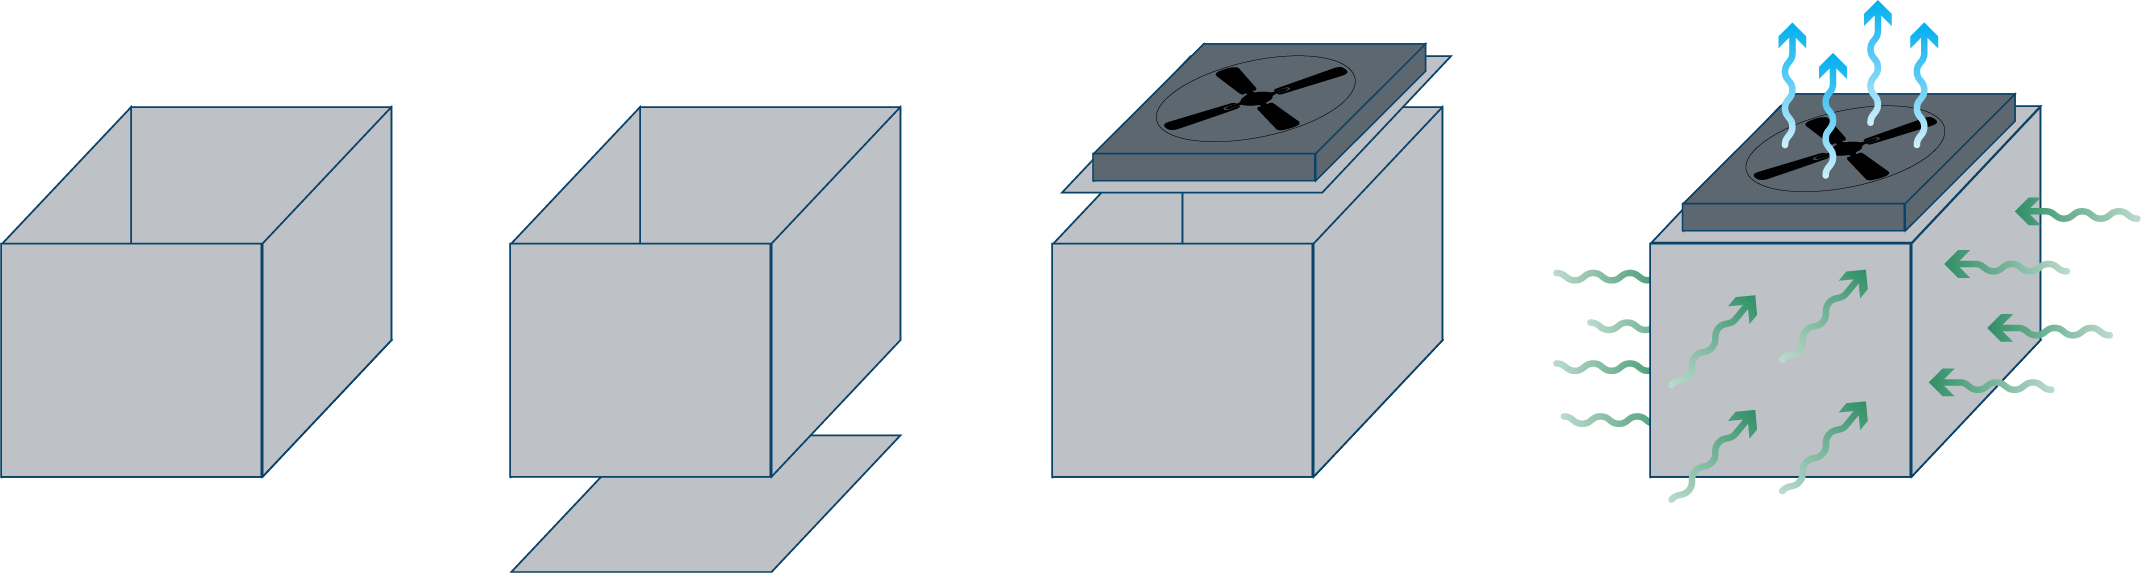 A four step diagram showing the creation of the main structure, with the last image showing the principle of air flow